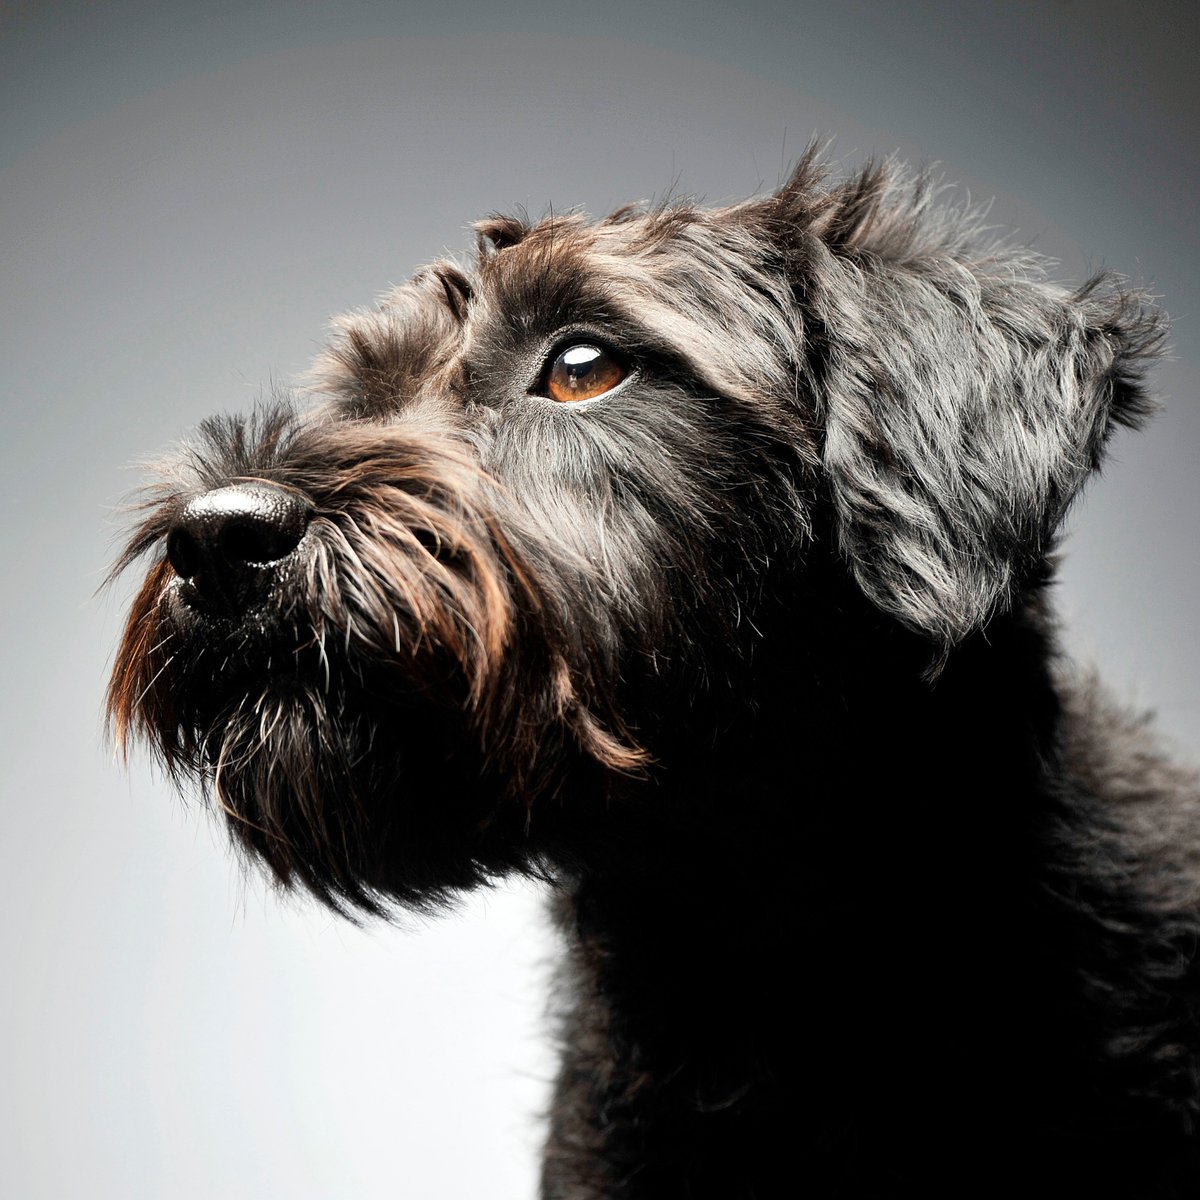 Close-up headshot of a black Schnauzer dog, representing a medium-sized breed in an article about different dog breeds categorized by size